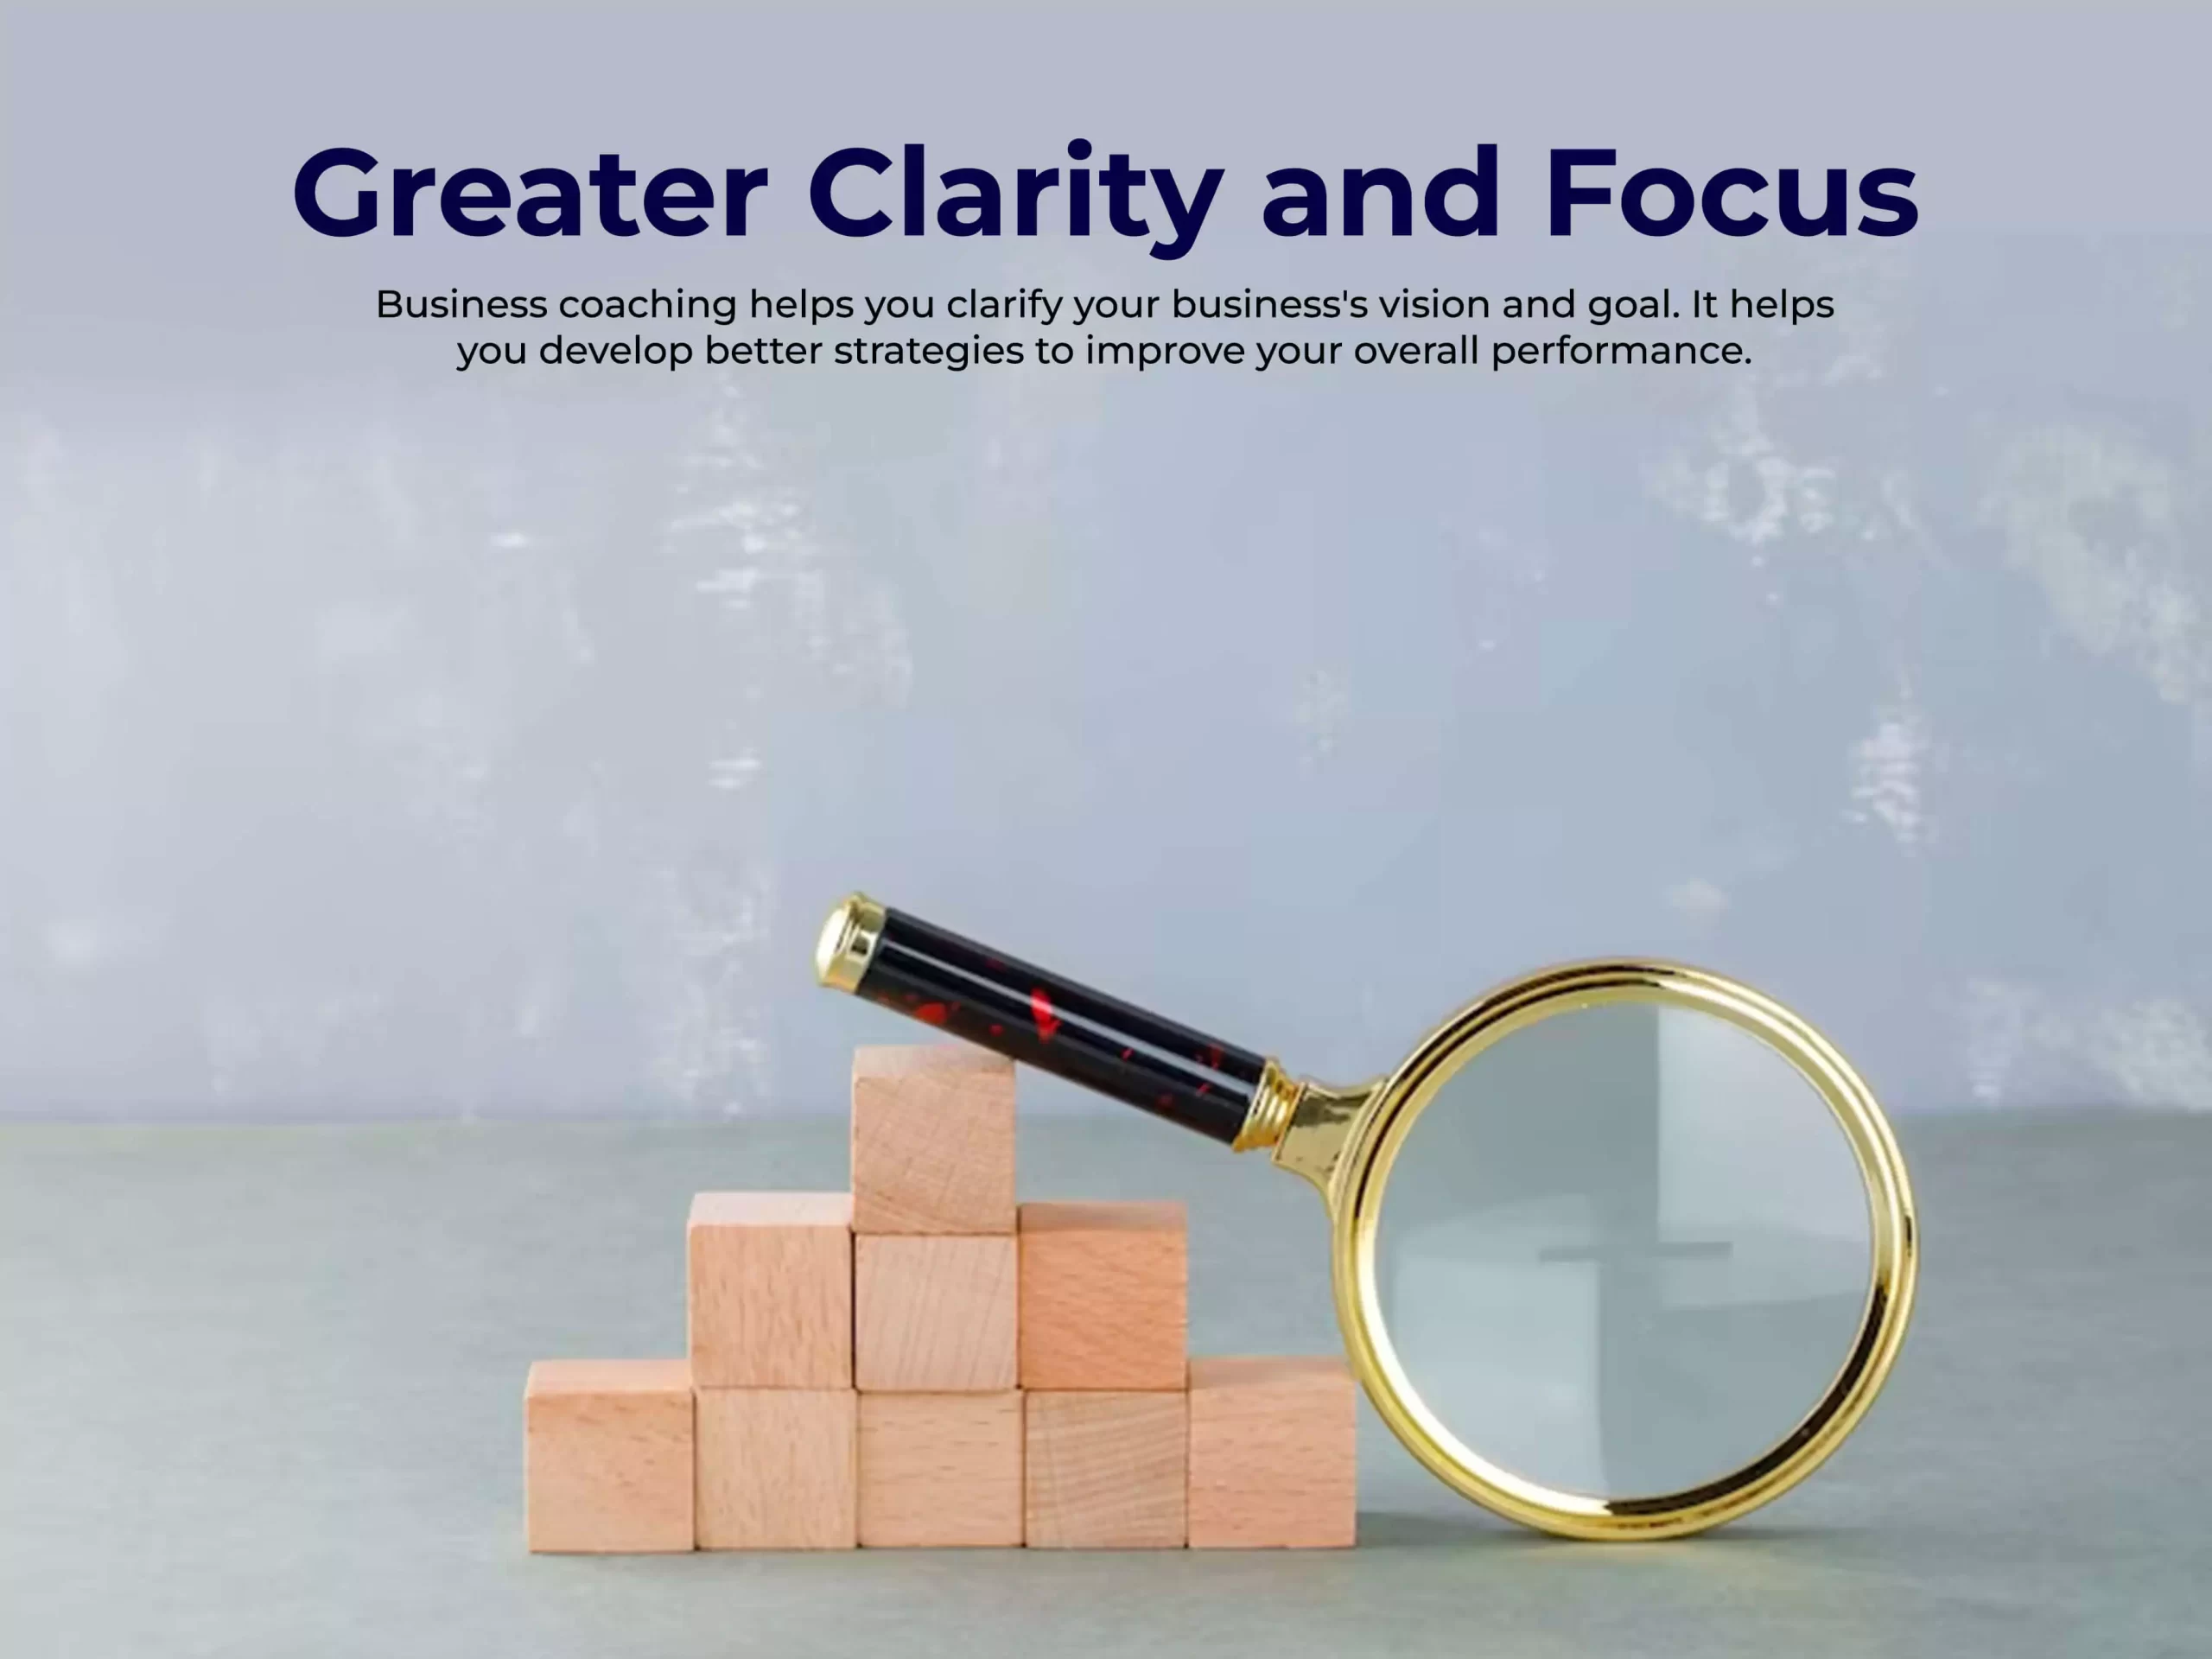 Greater clarity and focus